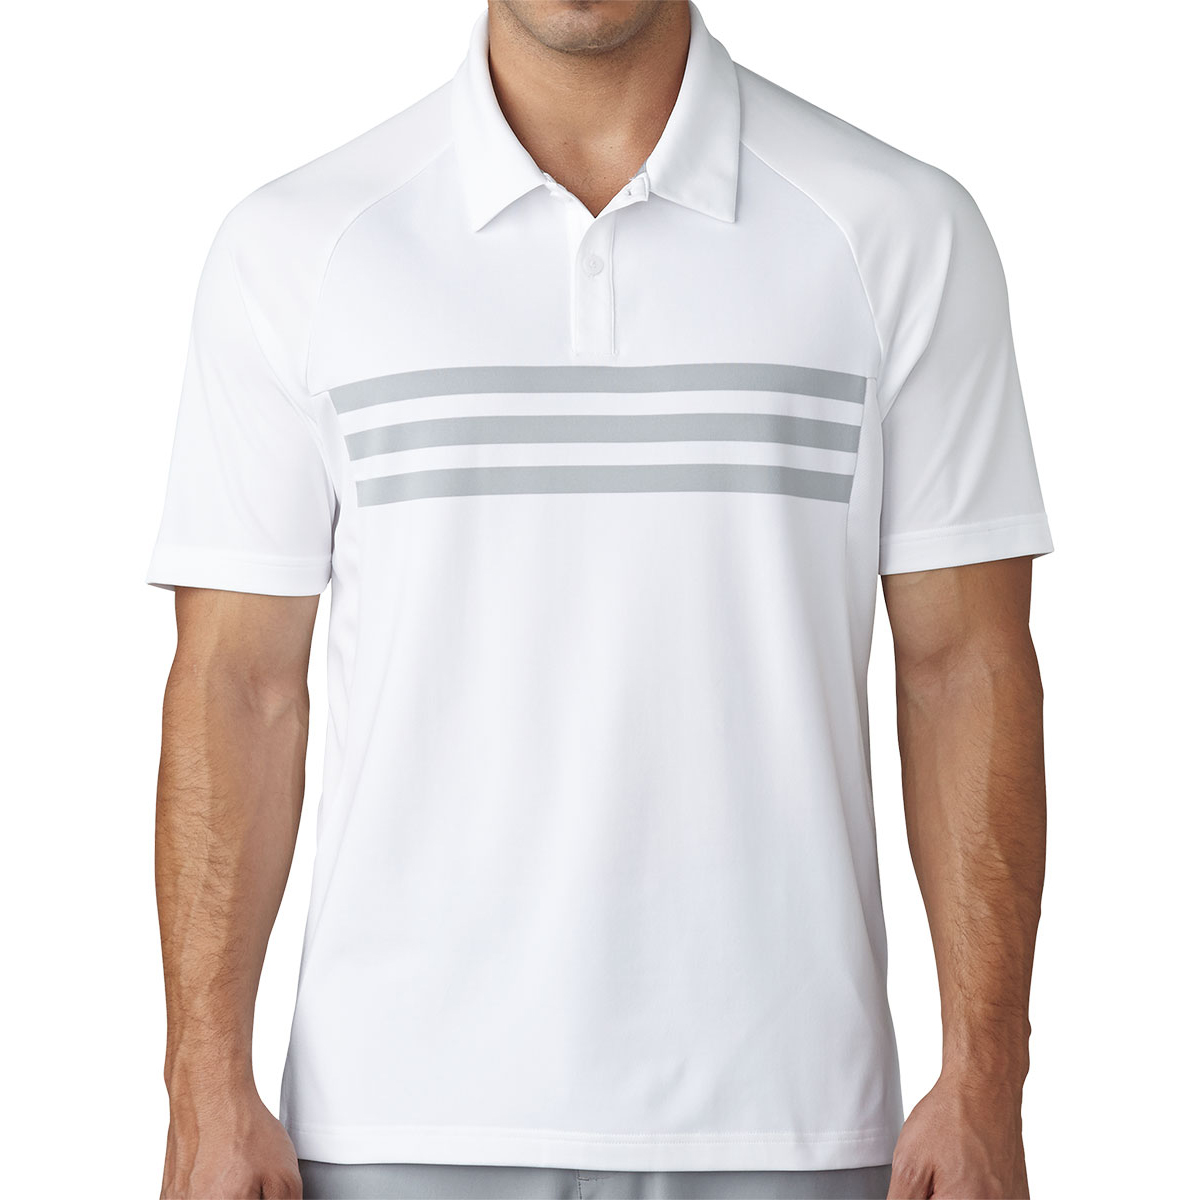 adidas climacool 3 stripes competition golf polo shirt